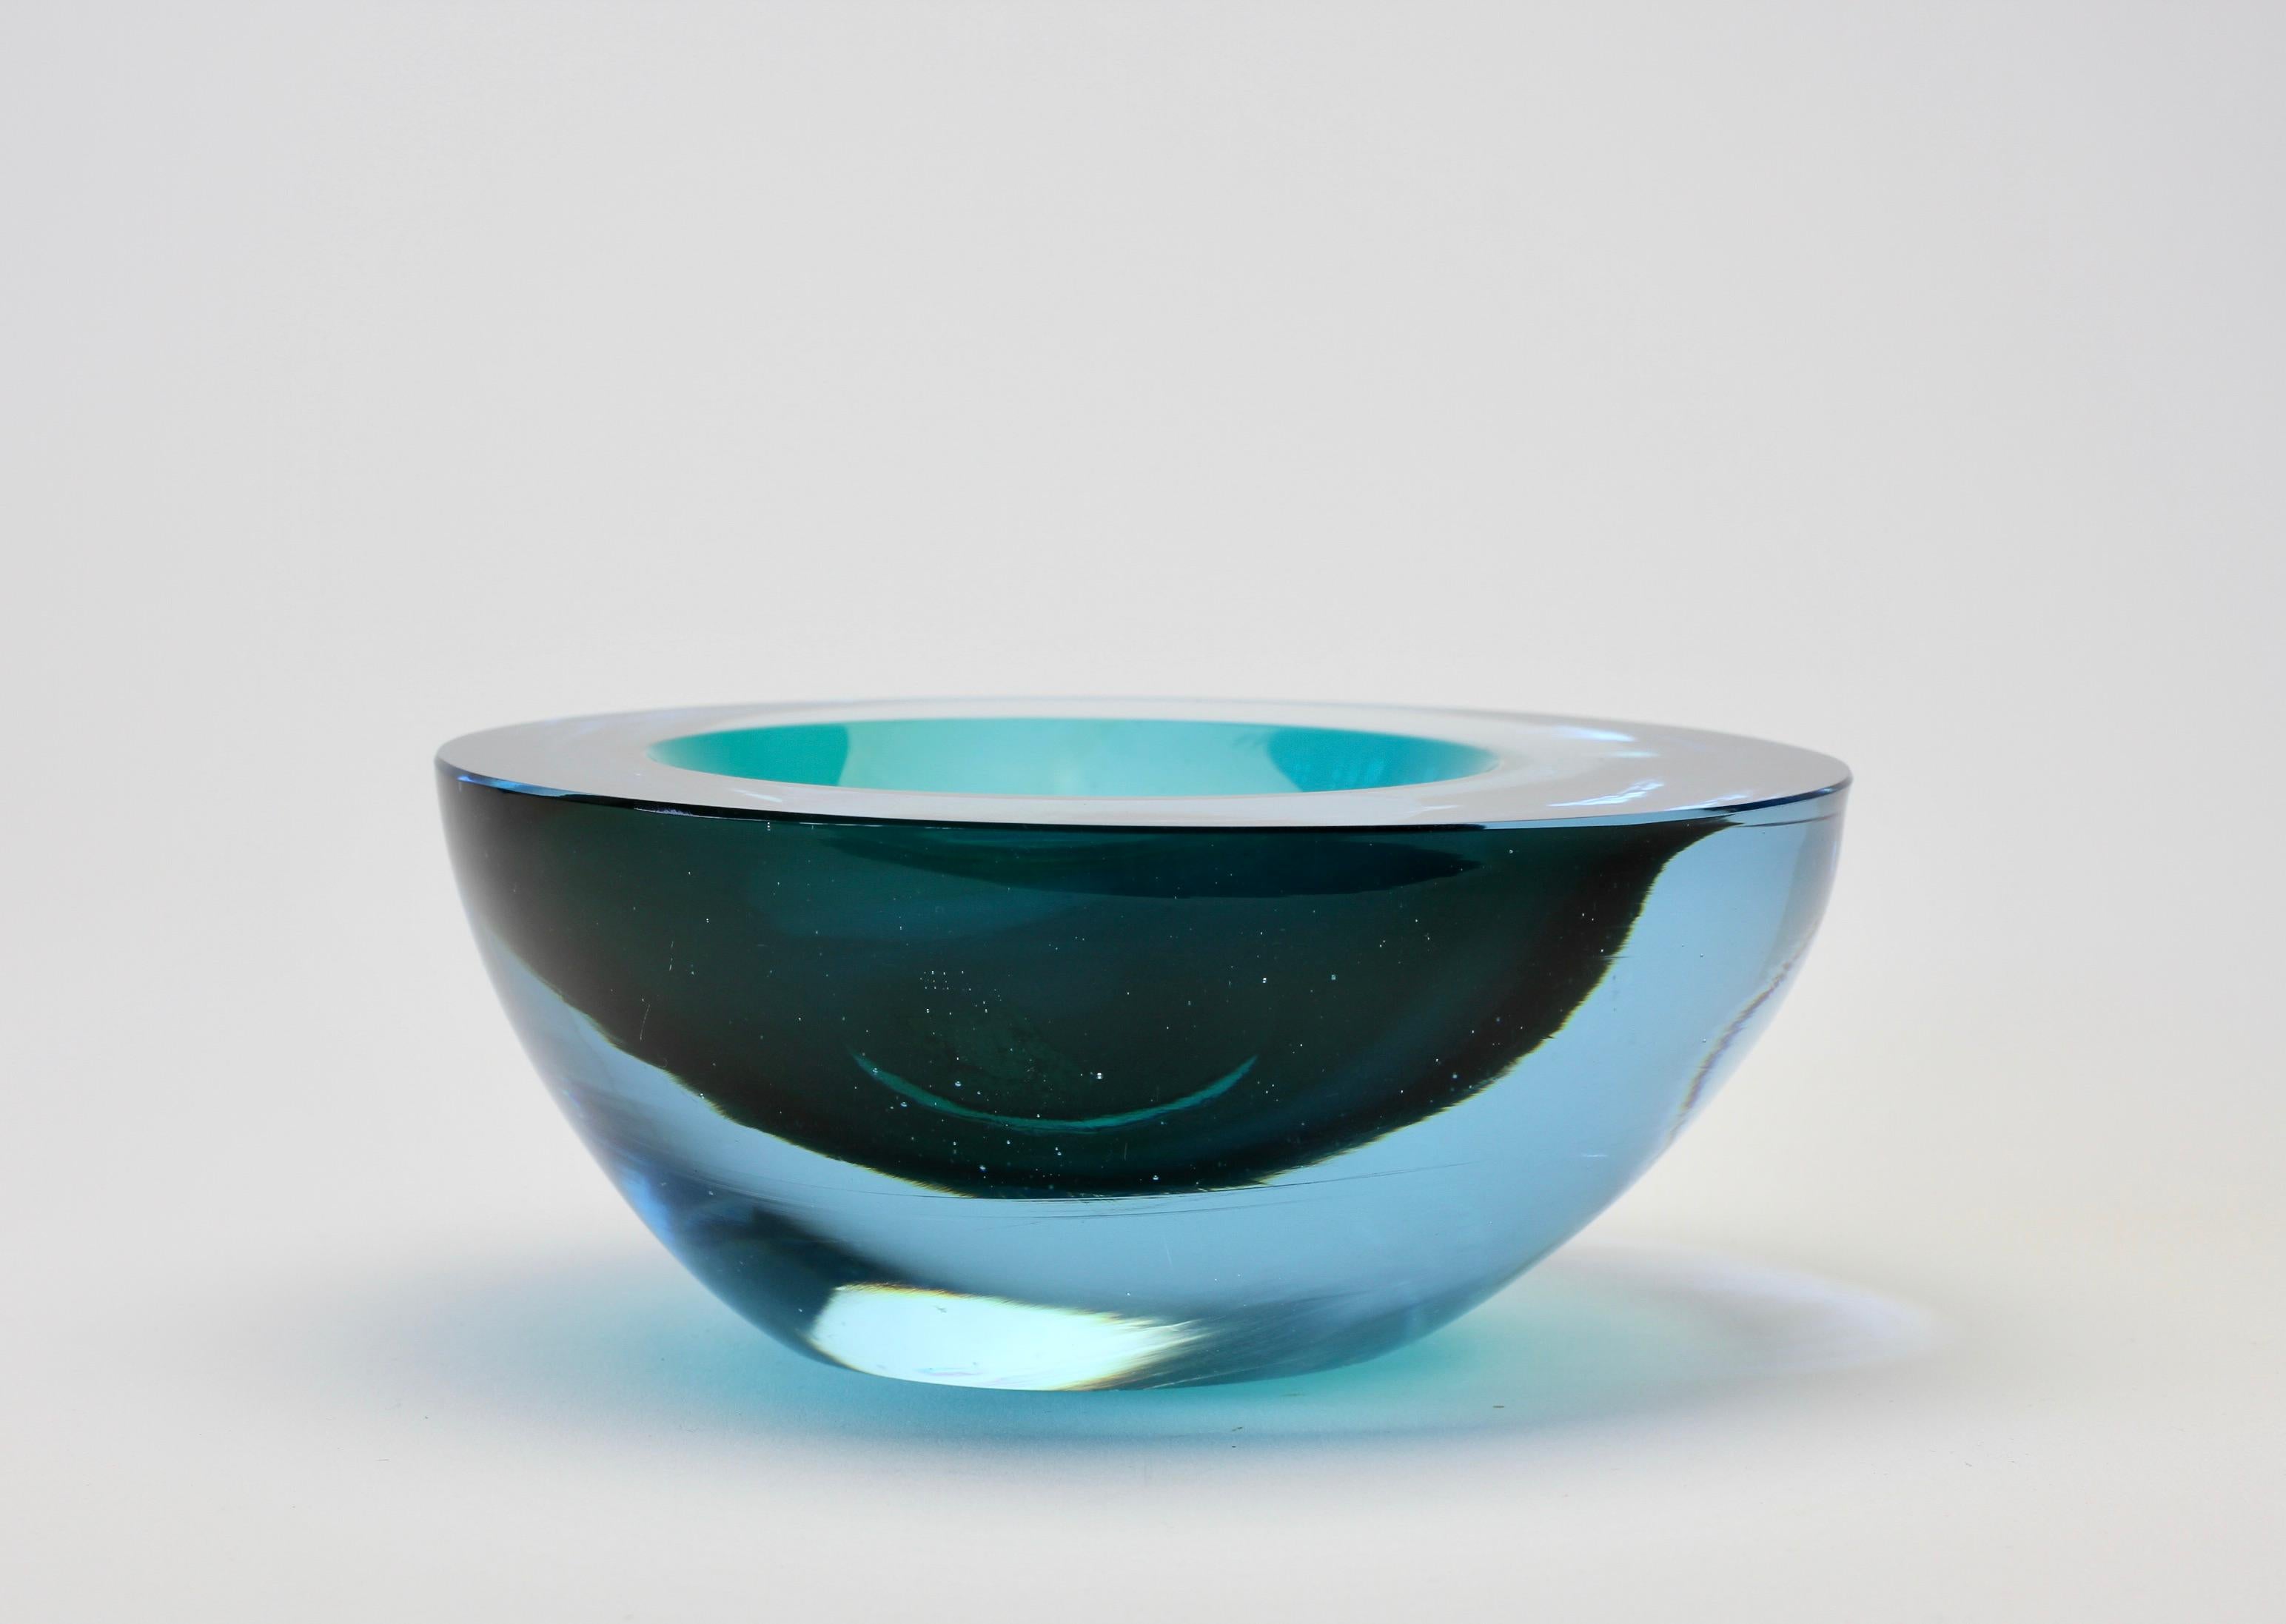 Large Cenedese Italian Asymmetric Blue Sommerso Murano Glass Bowl, Dish, Ashtray For Sale 2